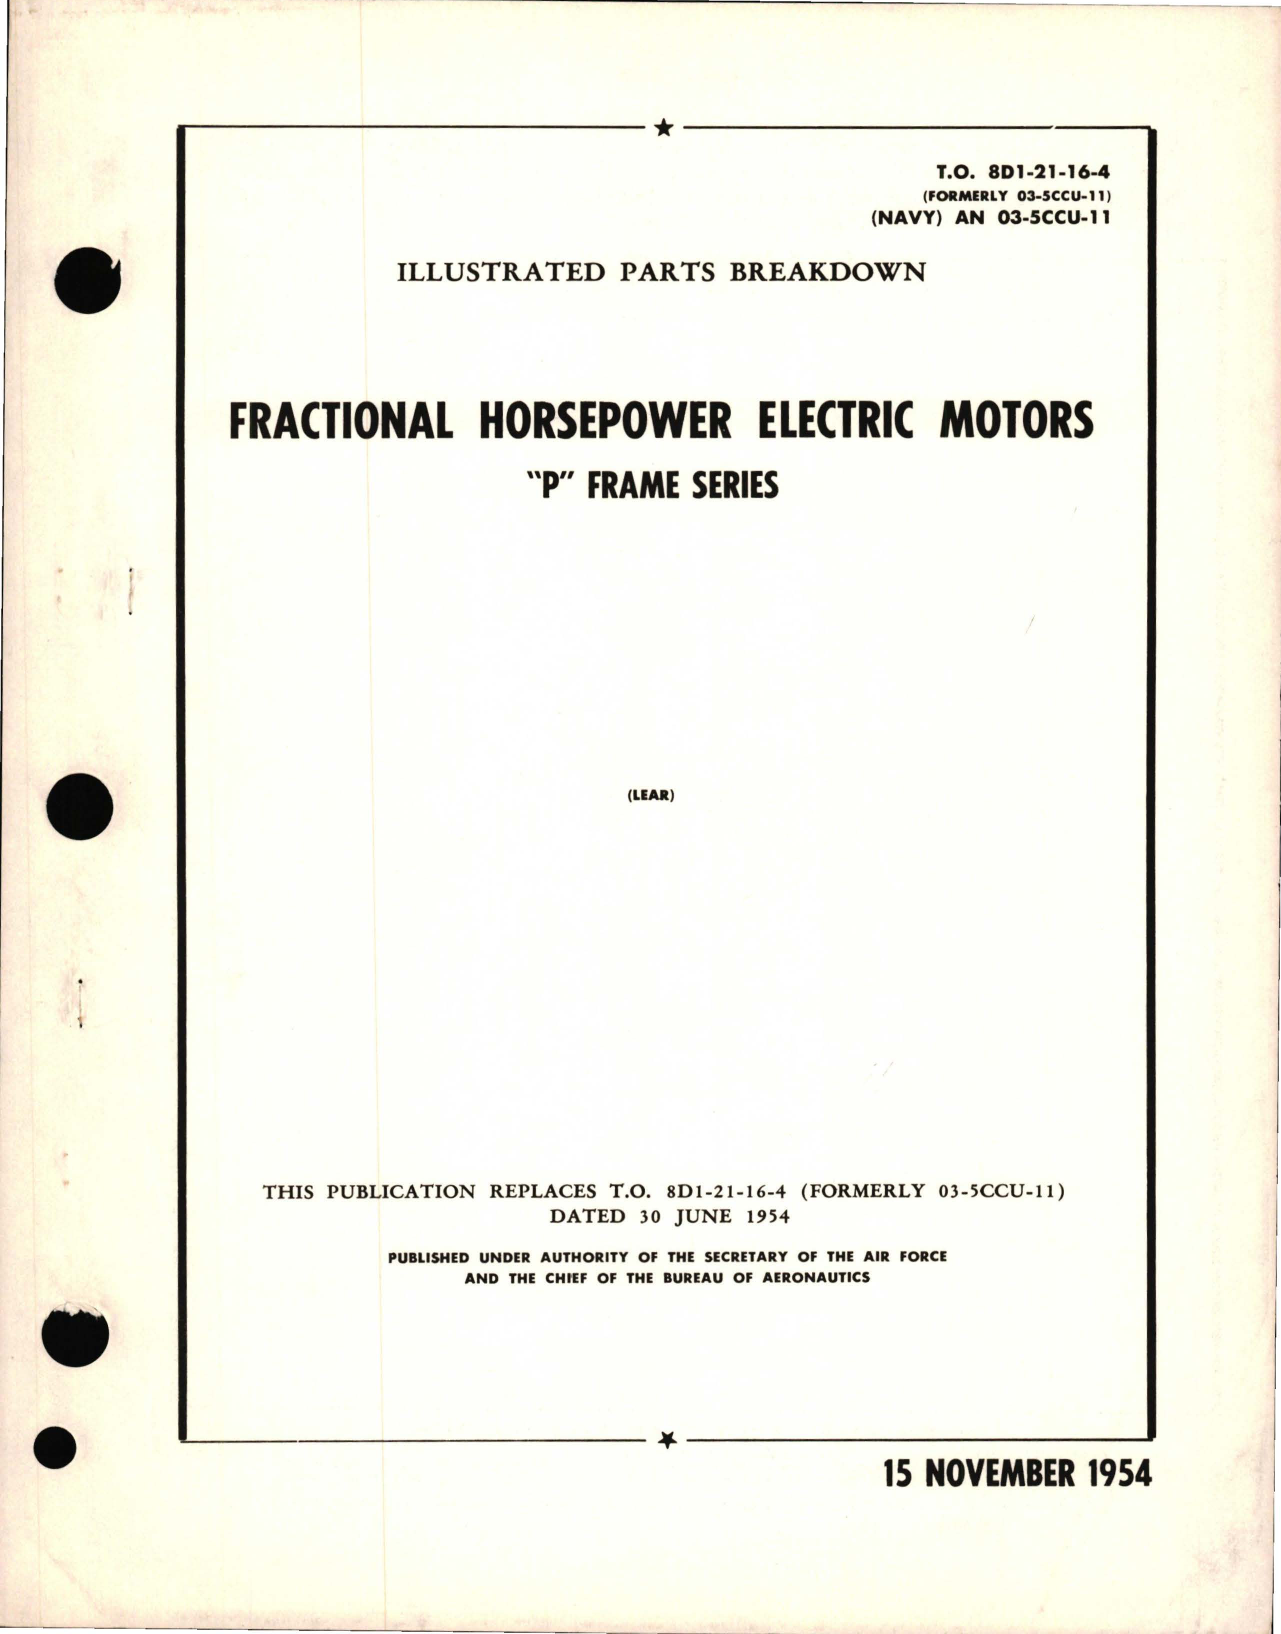 Sample page 1 from AirCorps Library document: Illustrated Parts Breakdown for Fractional Horsepower Electric Motors - P Frame Series